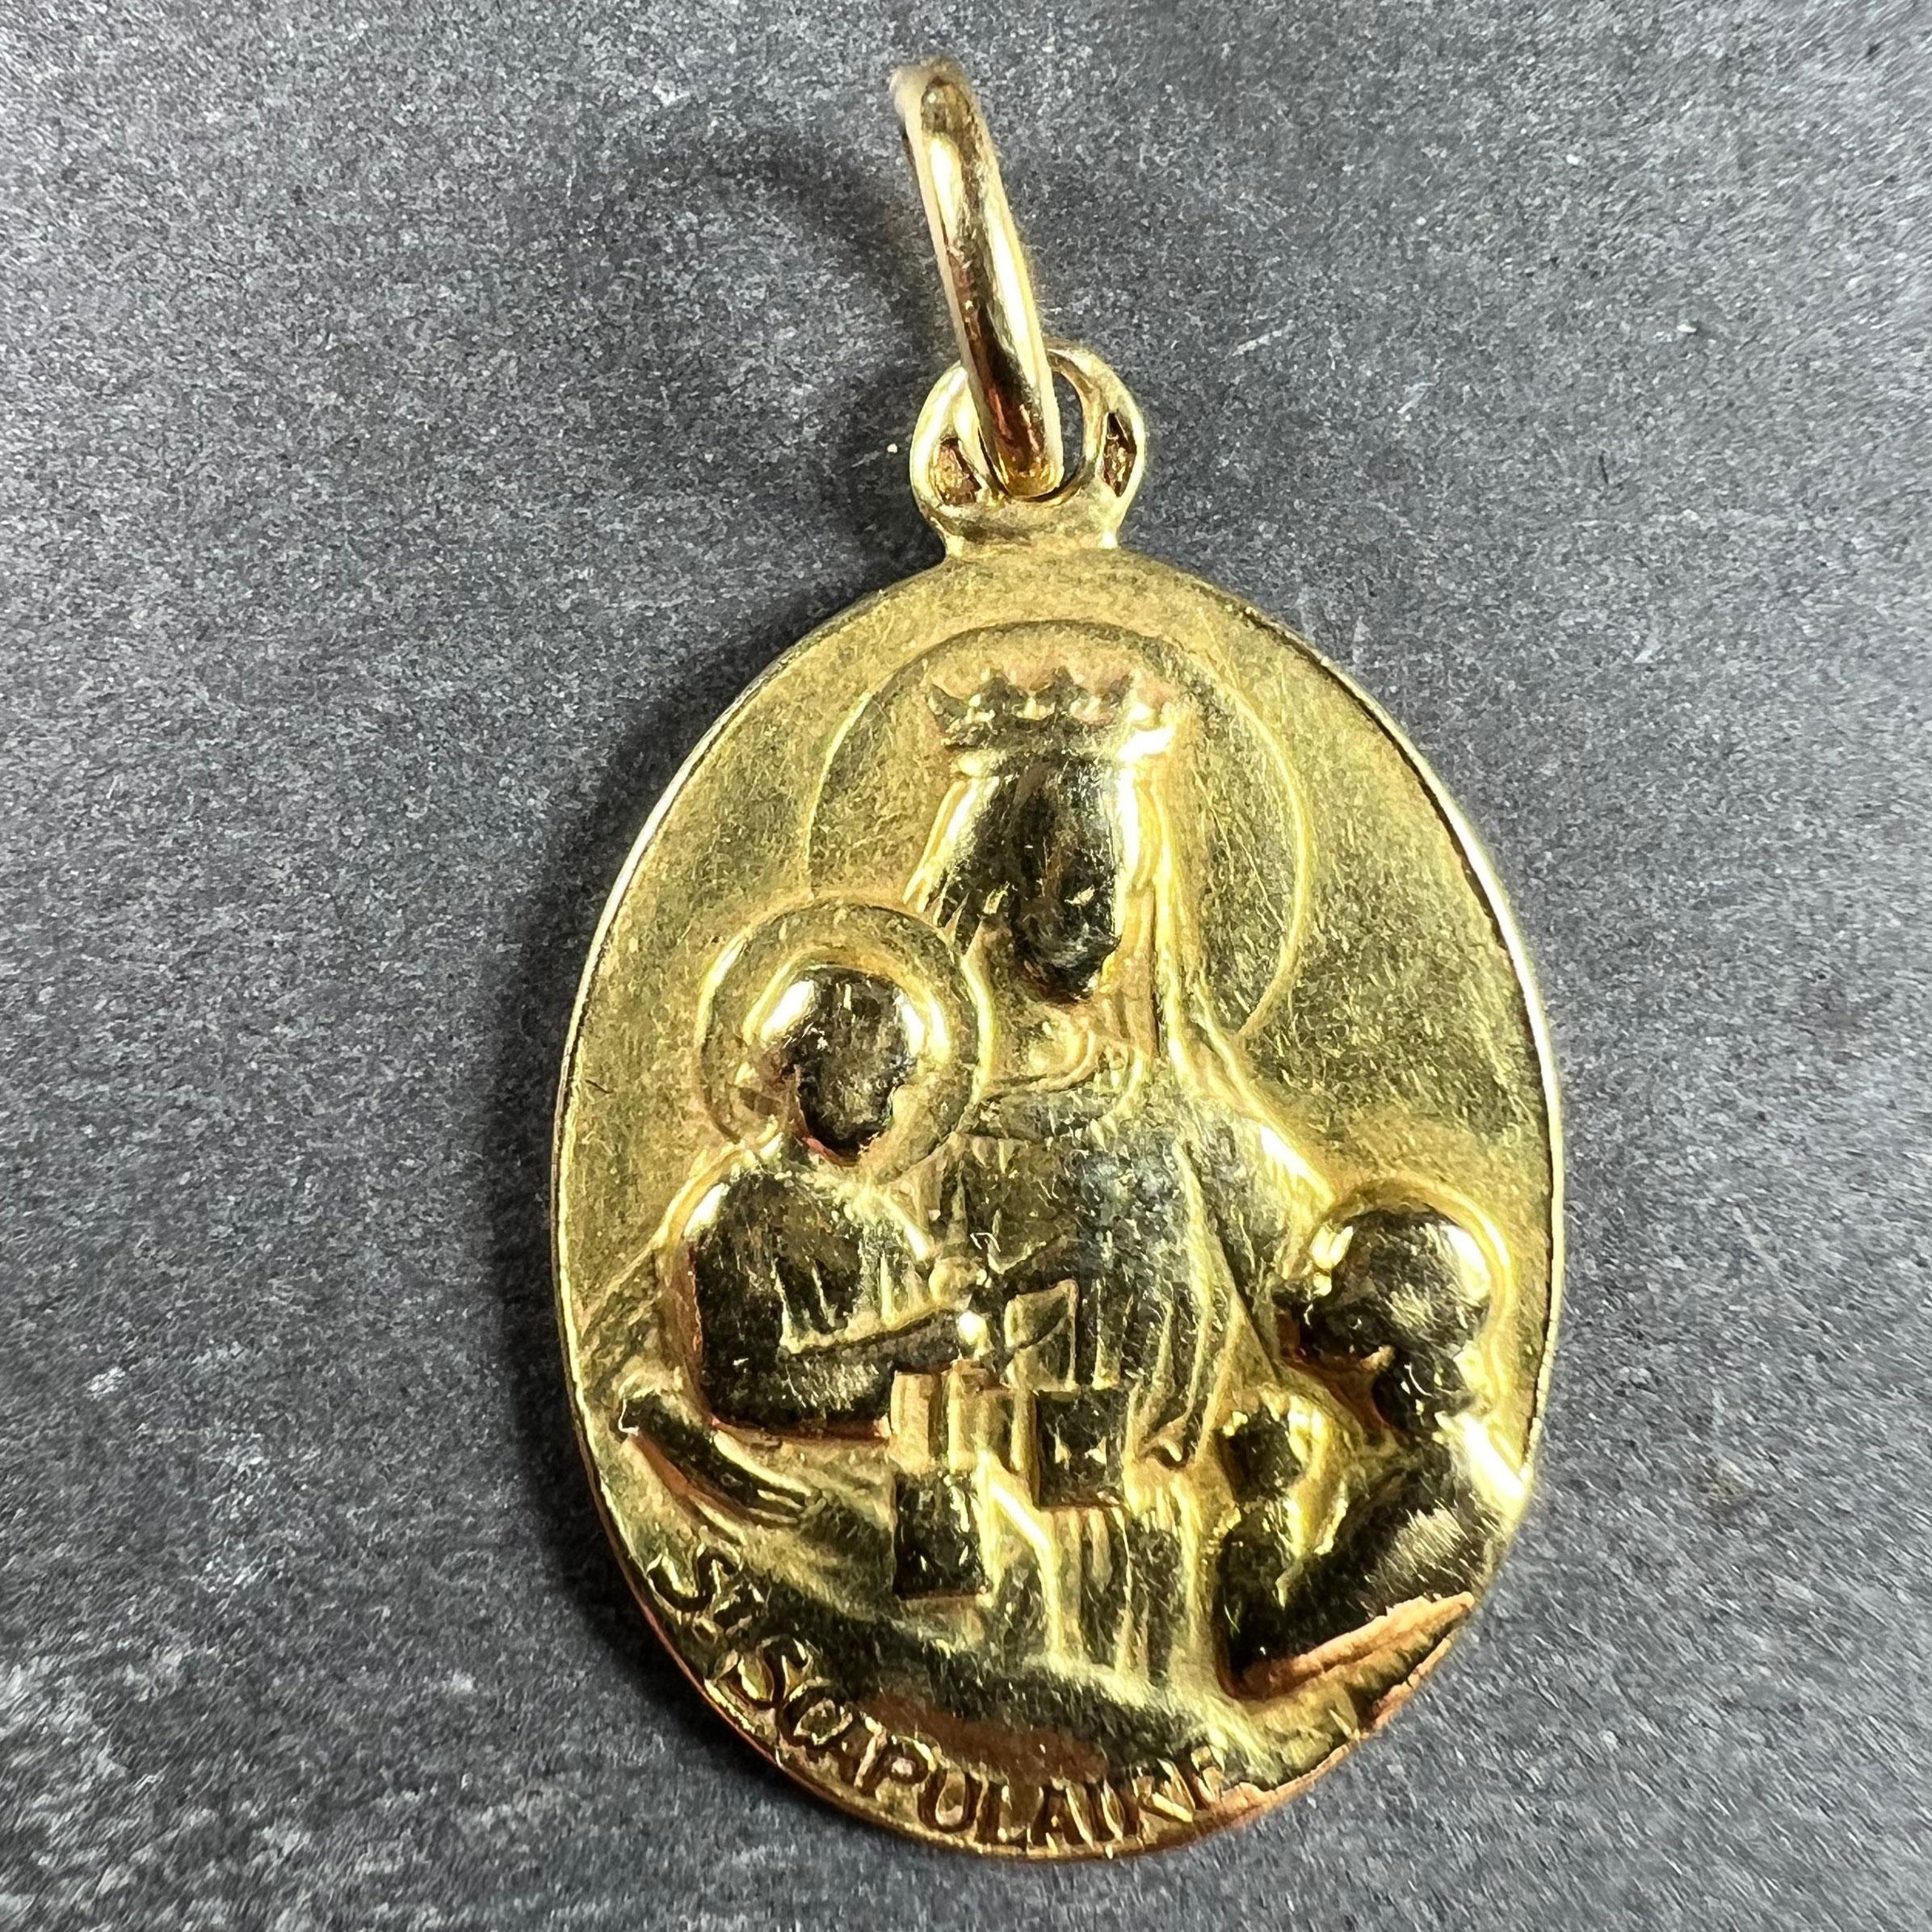 A French 18 karat (18K) yellow gold charm pendant designed as an oval medal with a relief of The Blessed Virgin Mary as a Madonna with the infant Christ holding a set of devotional scapulars, while a child prays to them. Beneath them the name 'St